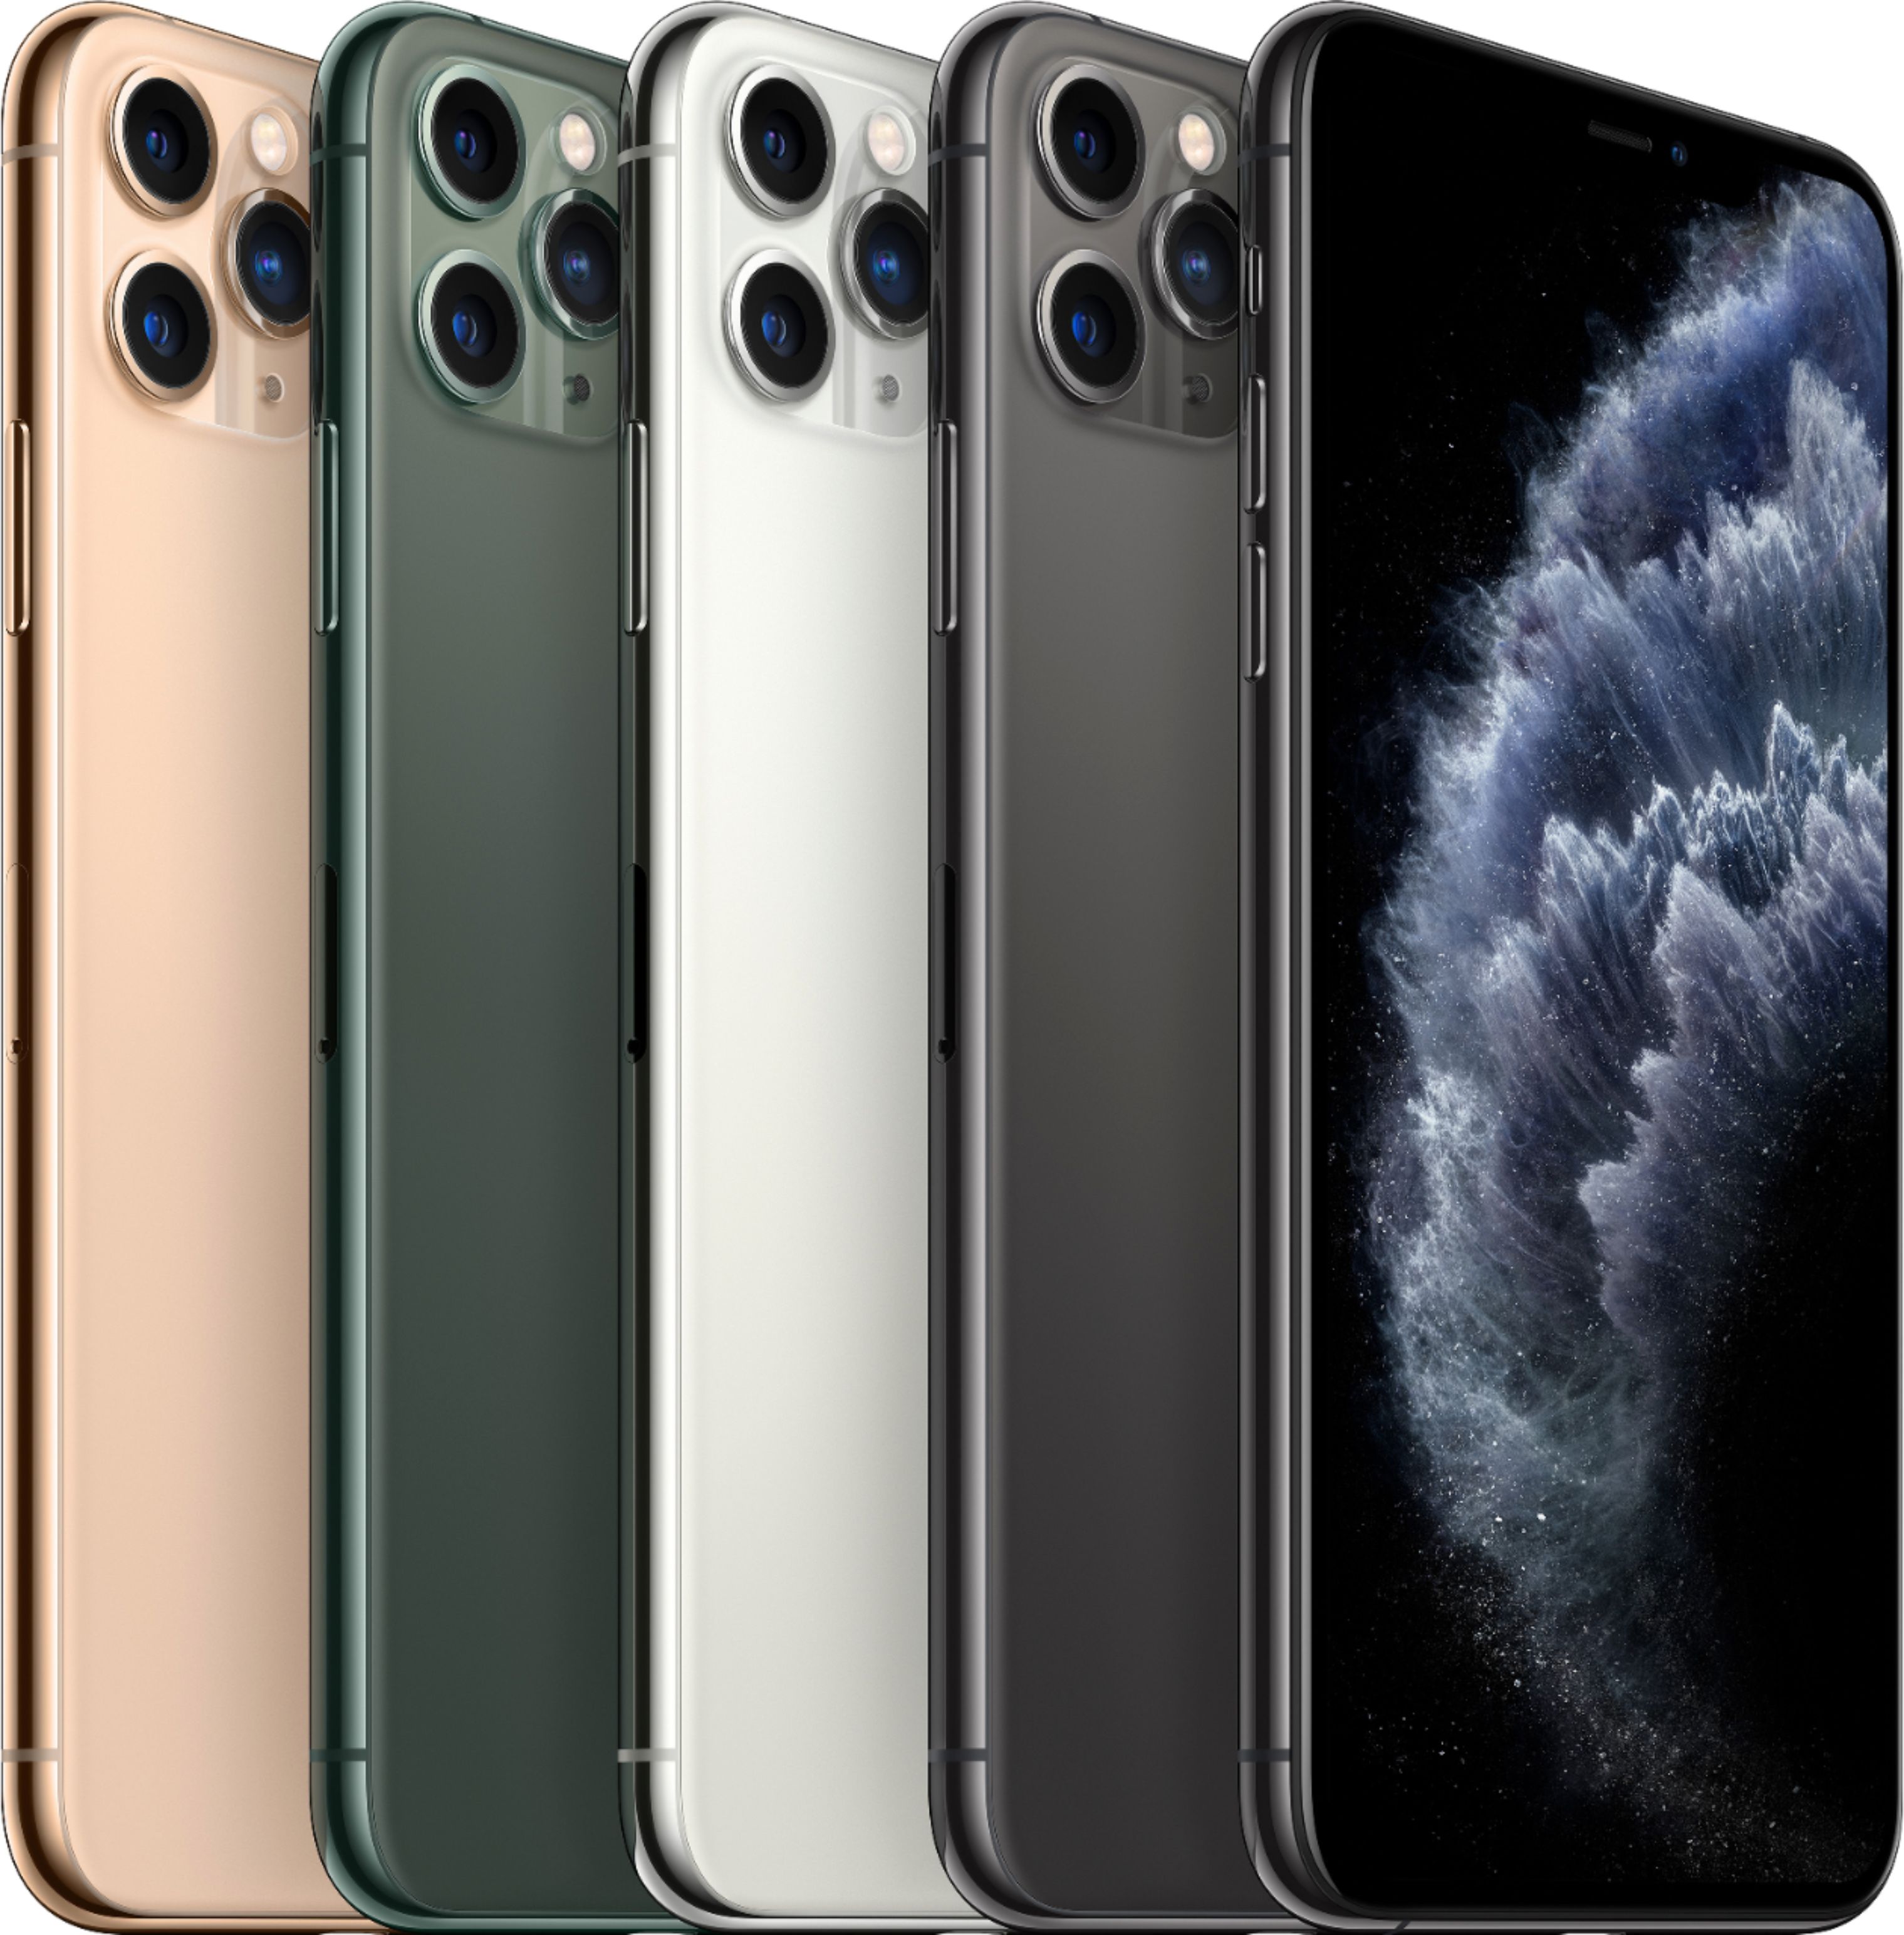 Apple Iphone 11 Pro Max 64gb Midnight Green At T Mwh22ll A Best Buy